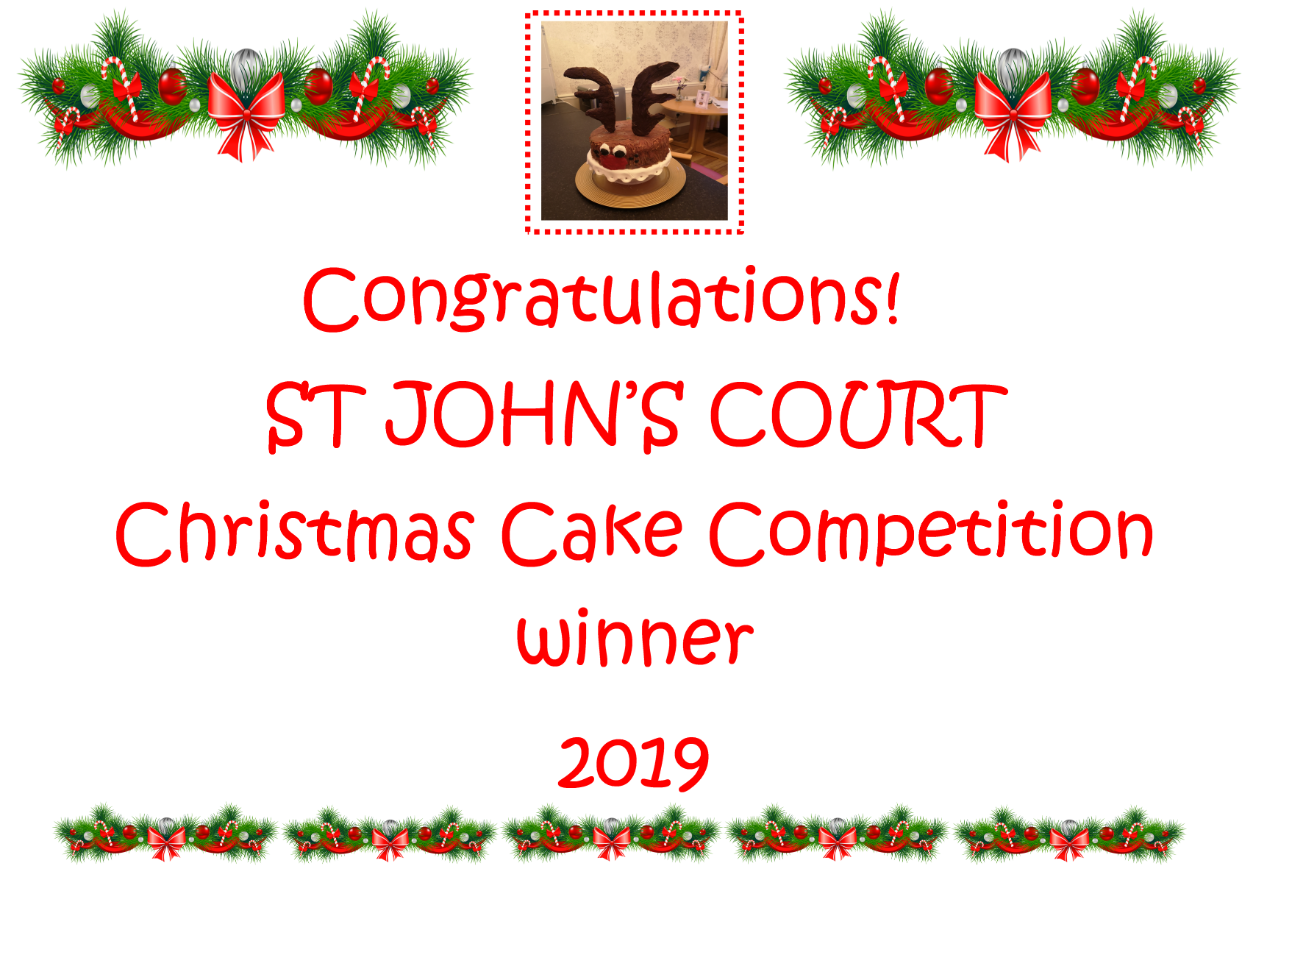 St John's Court - Winners of the Christmas Cake Competition Image